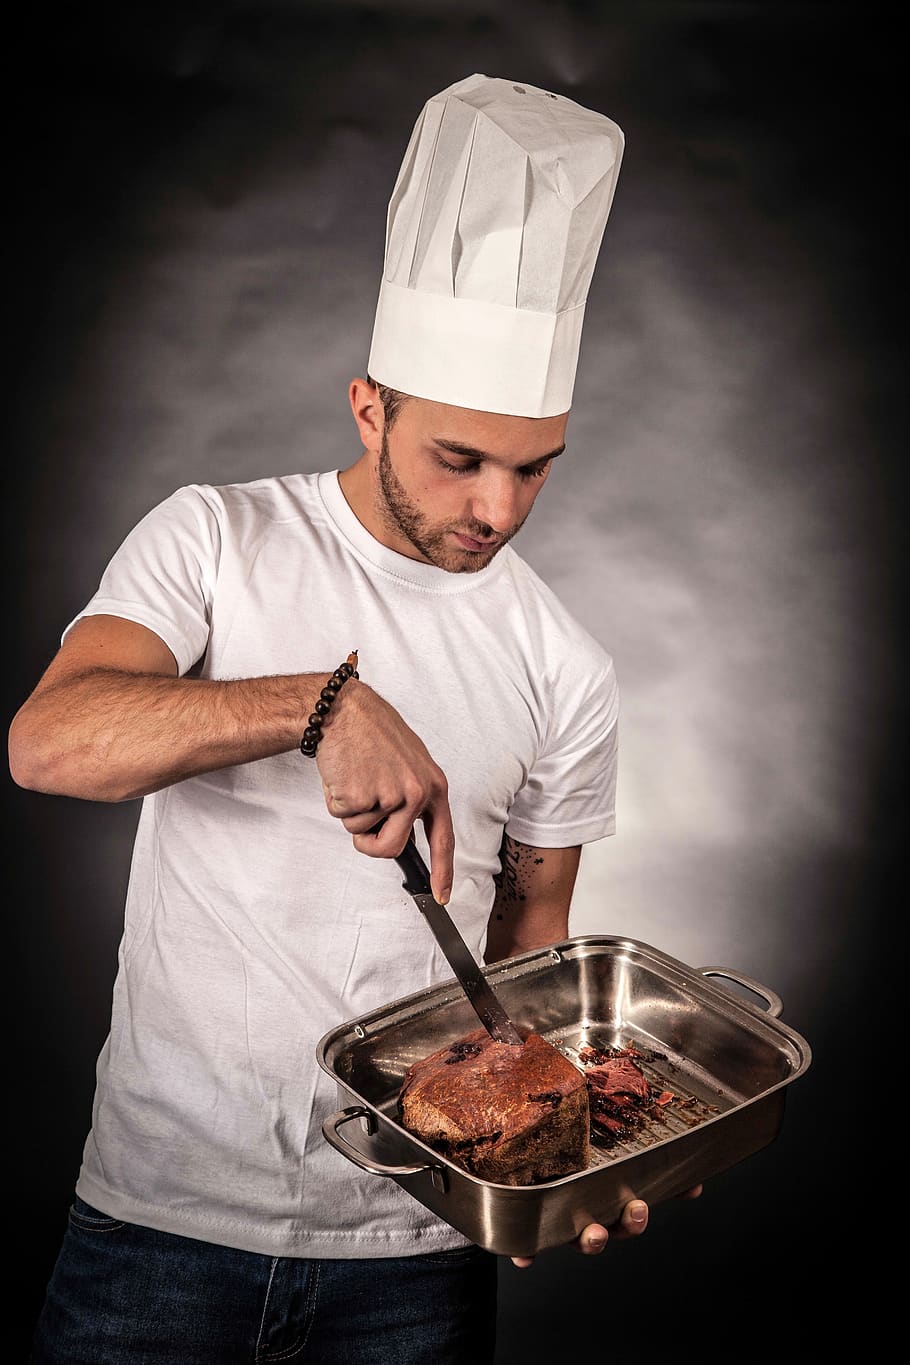 Chef Holding Tong, cook, food, kitchen, man, meat, pan, person